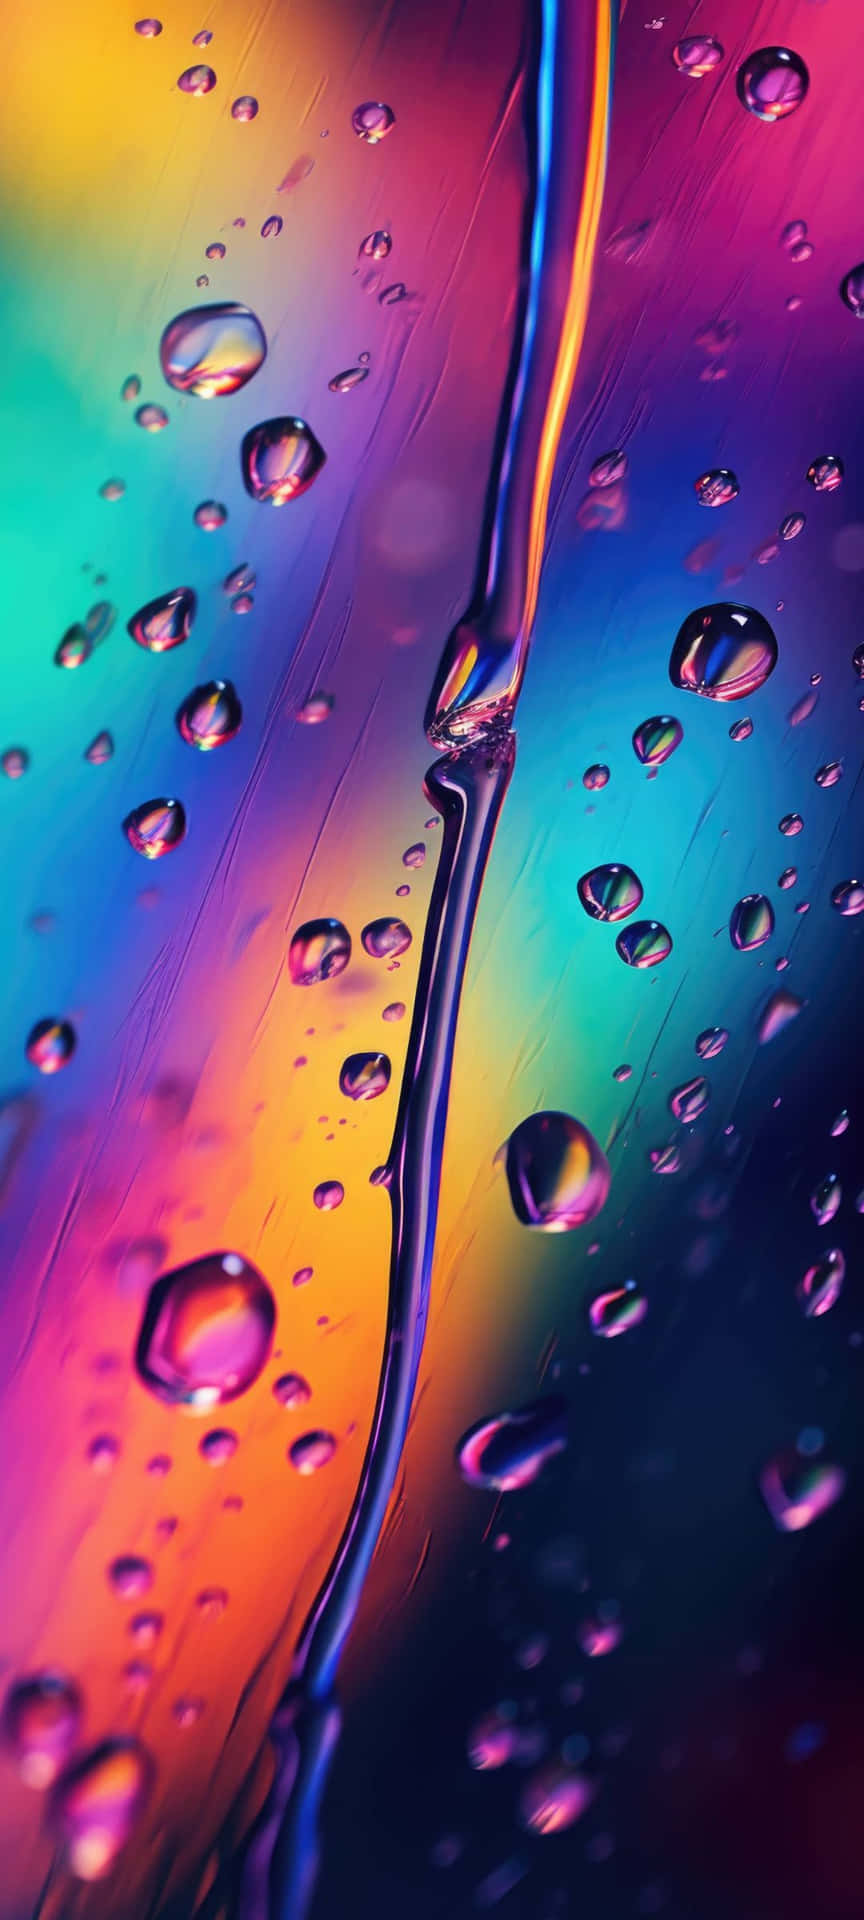 Colorful Water Droplets Abstract Wallpaper